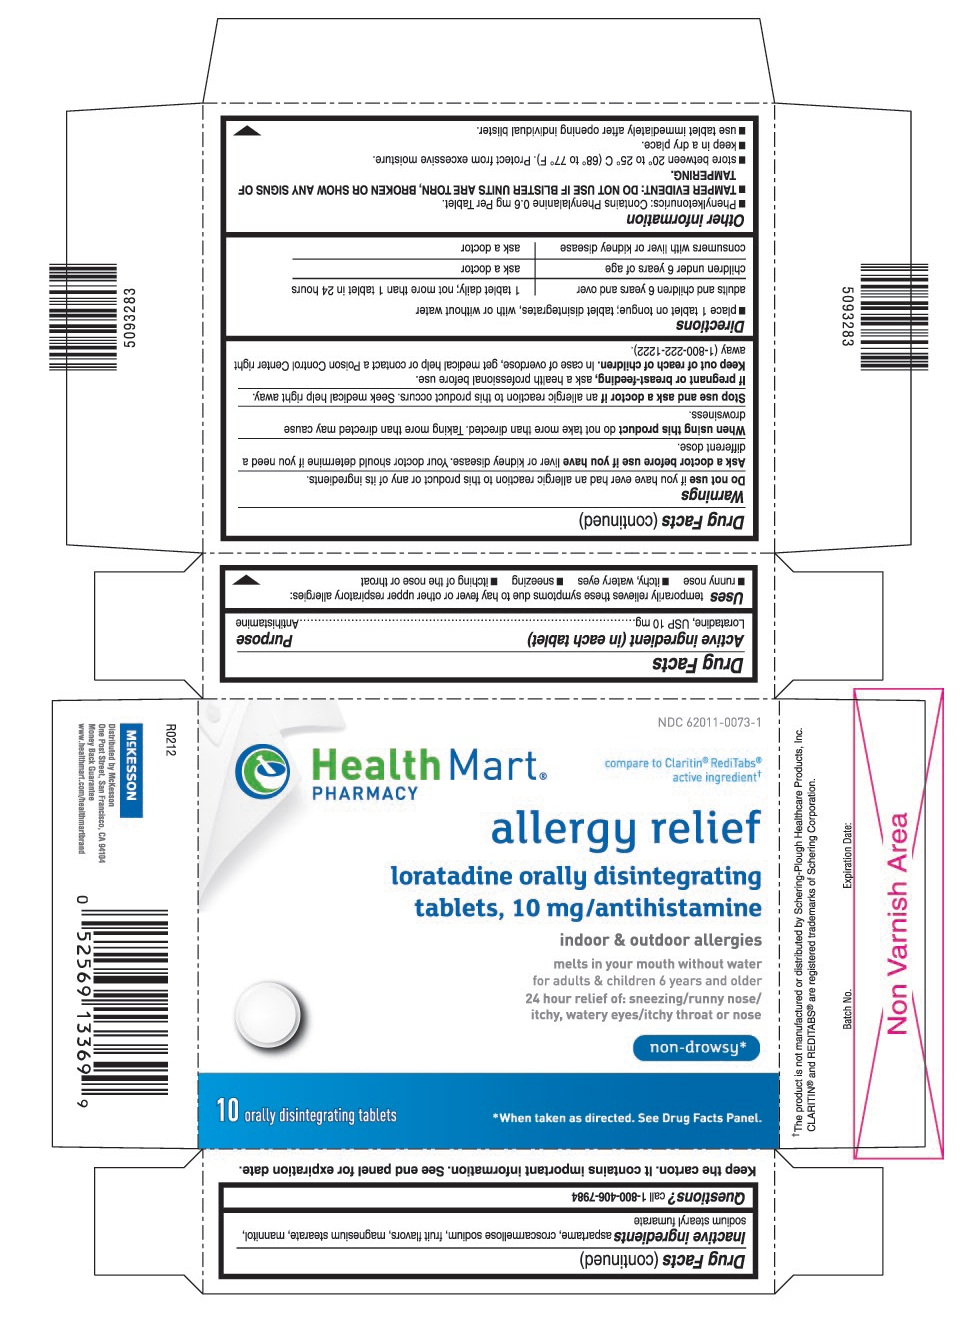 This is the 10 count blister carton label for Health Mart Loratadine ODT, 10 mg.